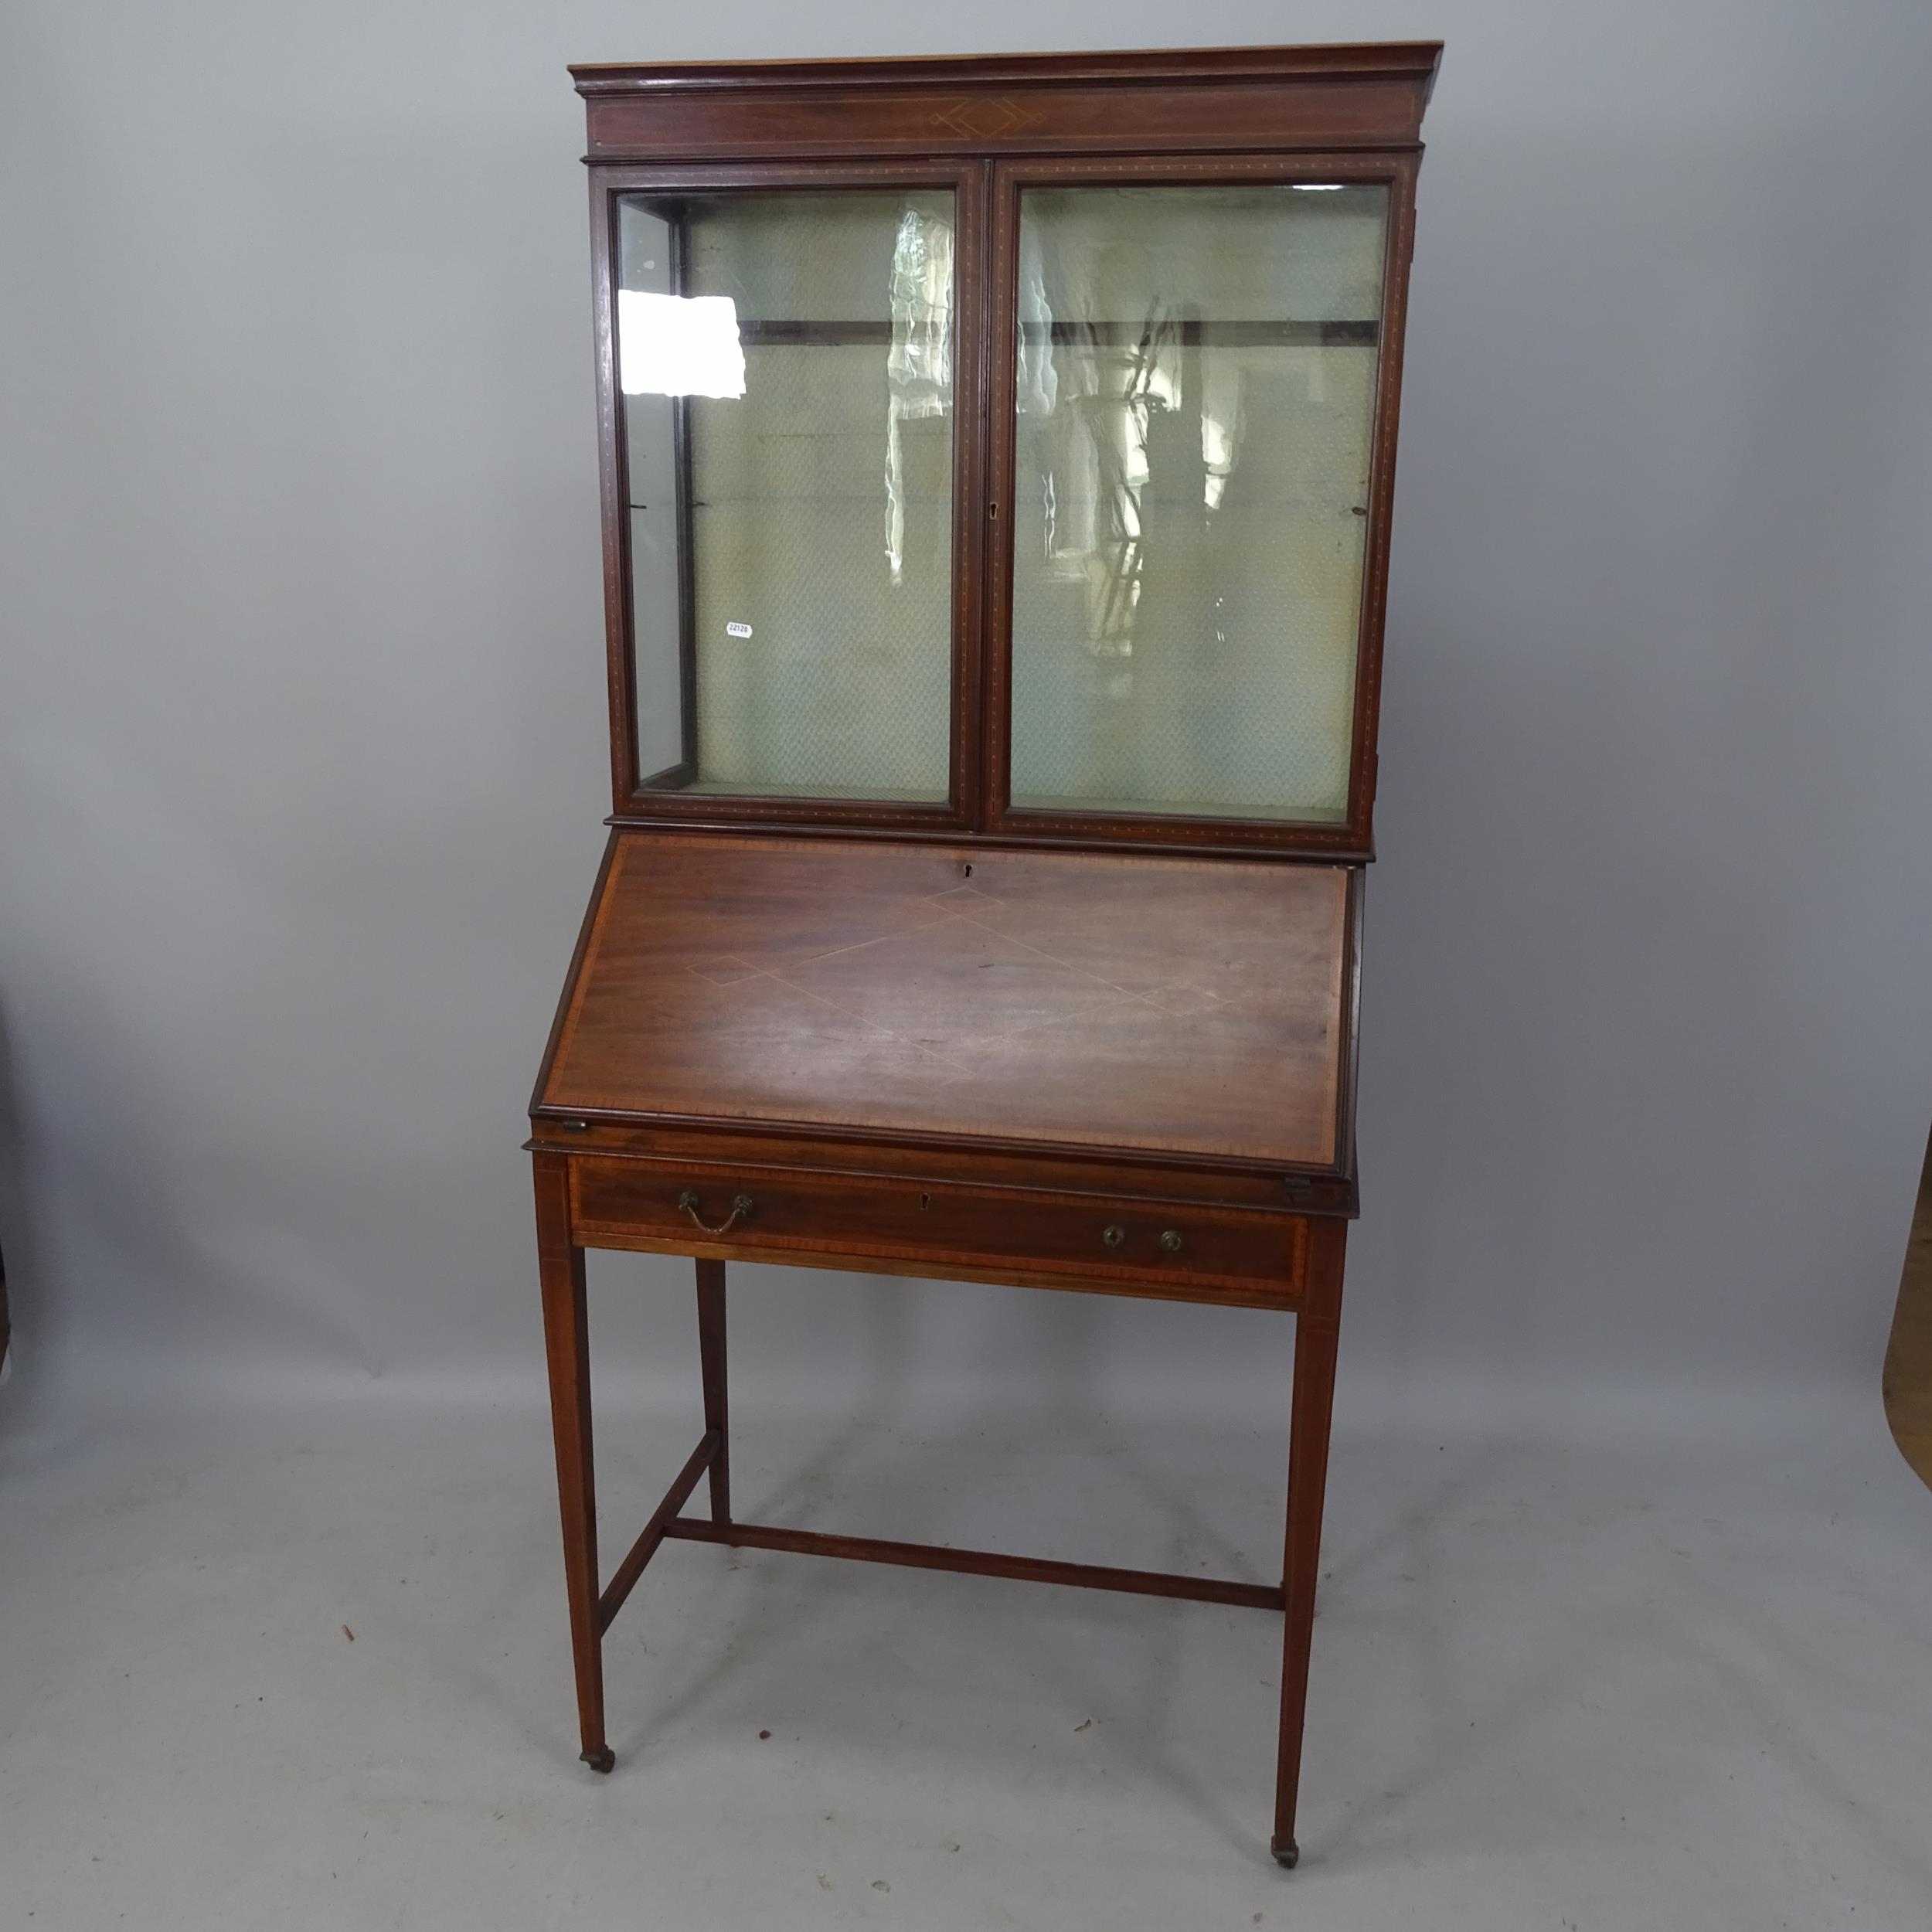 An Edwardian mahogany and satinwood-strung 2-section bureau bookcase, the fall-front revealing a